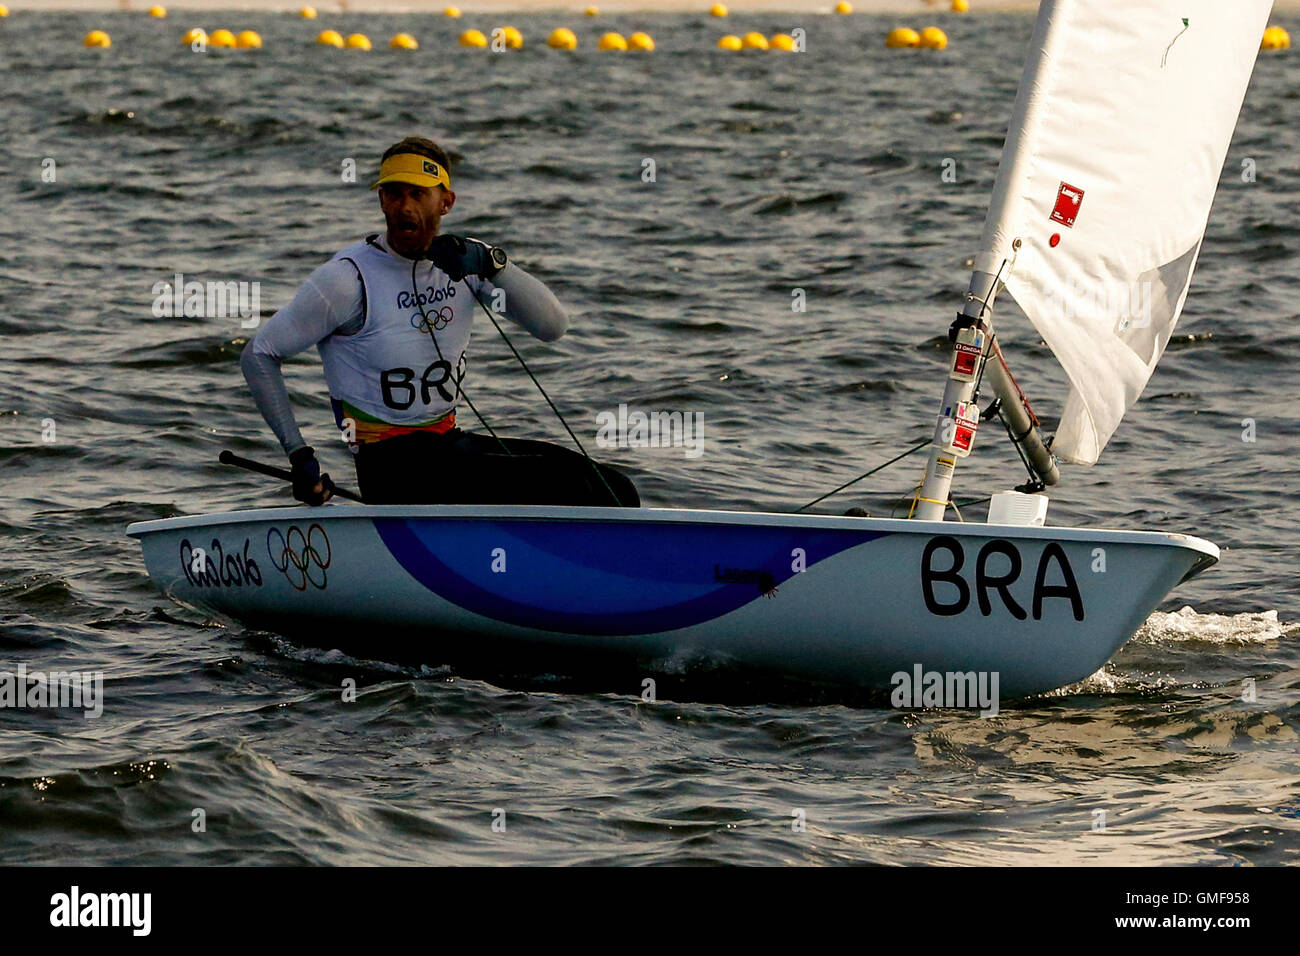 RIO DE JANEIRO, RJ - 16.08.2016: 2016 SAILING OLYMPICS - Robert Scheidt (BRA) during the candle Rio Olympics 2016 held at Marina da Glória, in Guanabara Bay. NOT AVAILABLE FOR LICENSING IN CHINA (Photo: Marcelo Cortes/Fotoarena) Stock Photo